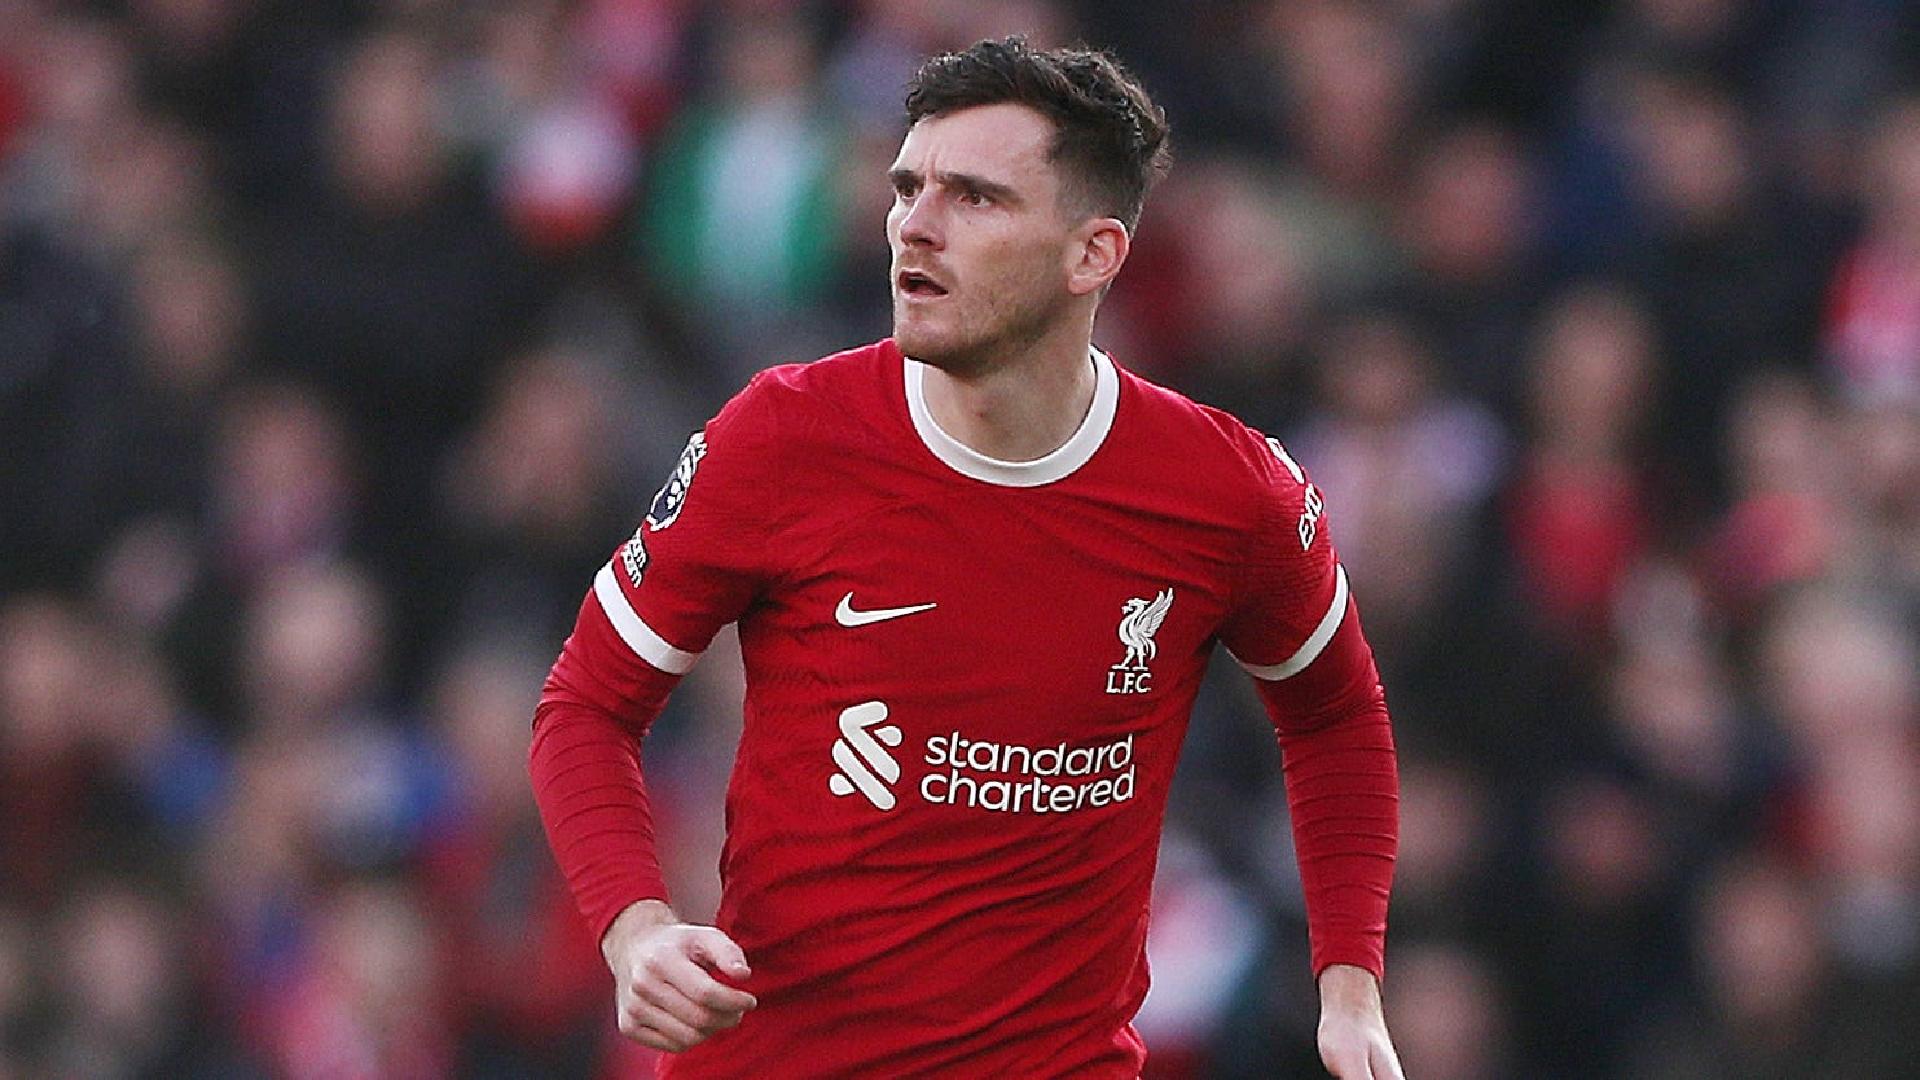 Jurgen Klopp says Liverpool assessing Andy Robertson injury ‘day by day’